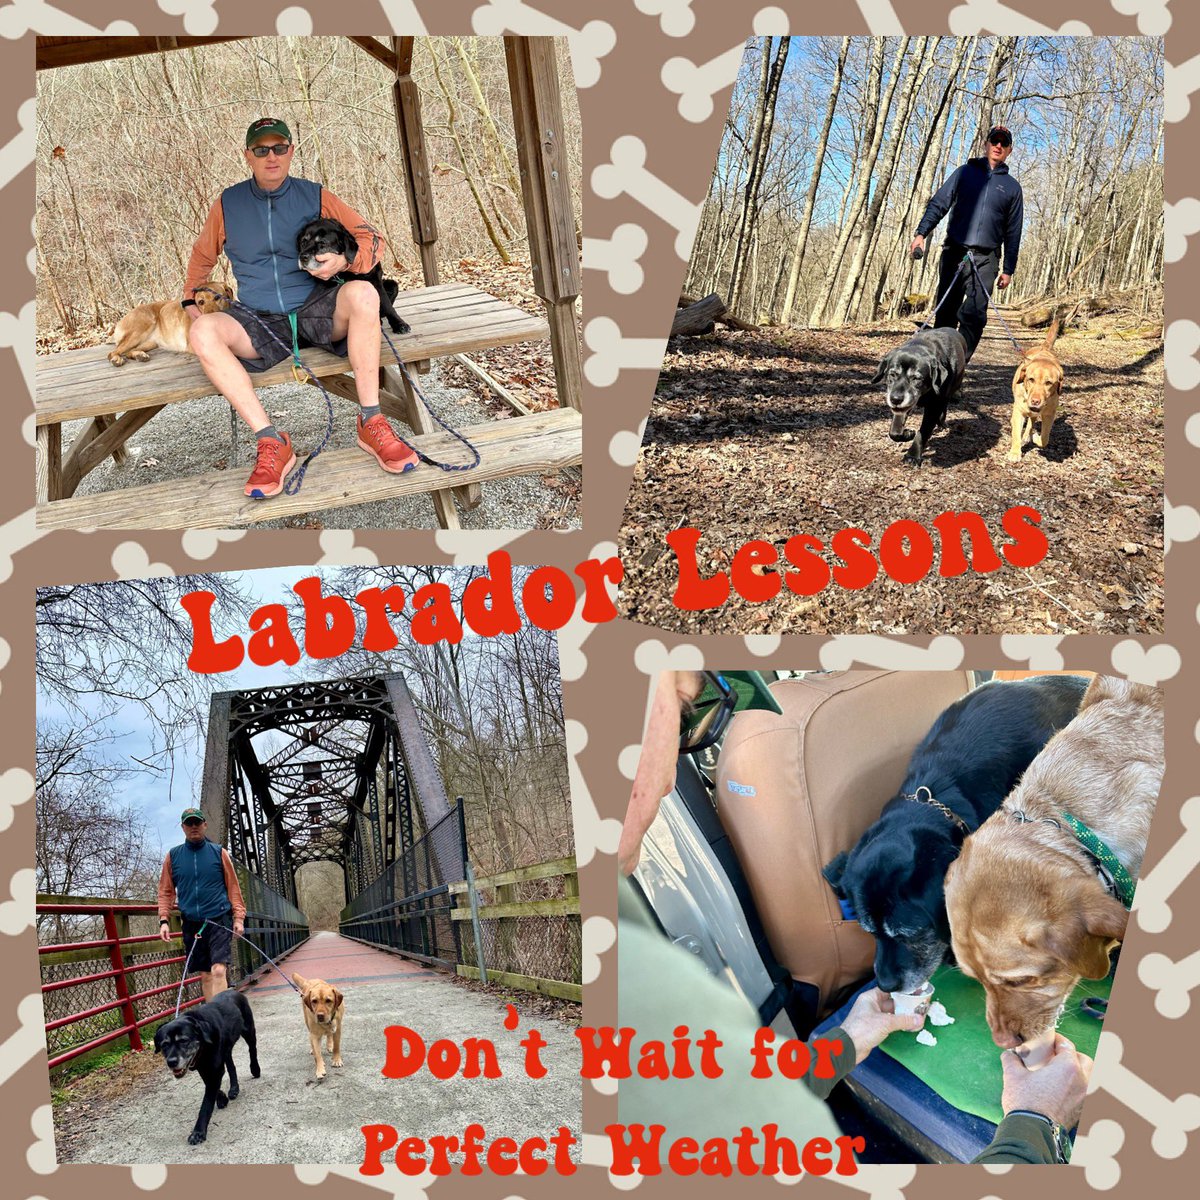 #LabradorLesson from #FitLabPGH (link below): Don’t wait for “perfect” weather to get moving. Adapt your plan as needed. Dress for conditions. #GetOutside #GetMoving 

#2024Goals #MoveMore #WiseWords 

tinyurl.com/FLP-LabWeather